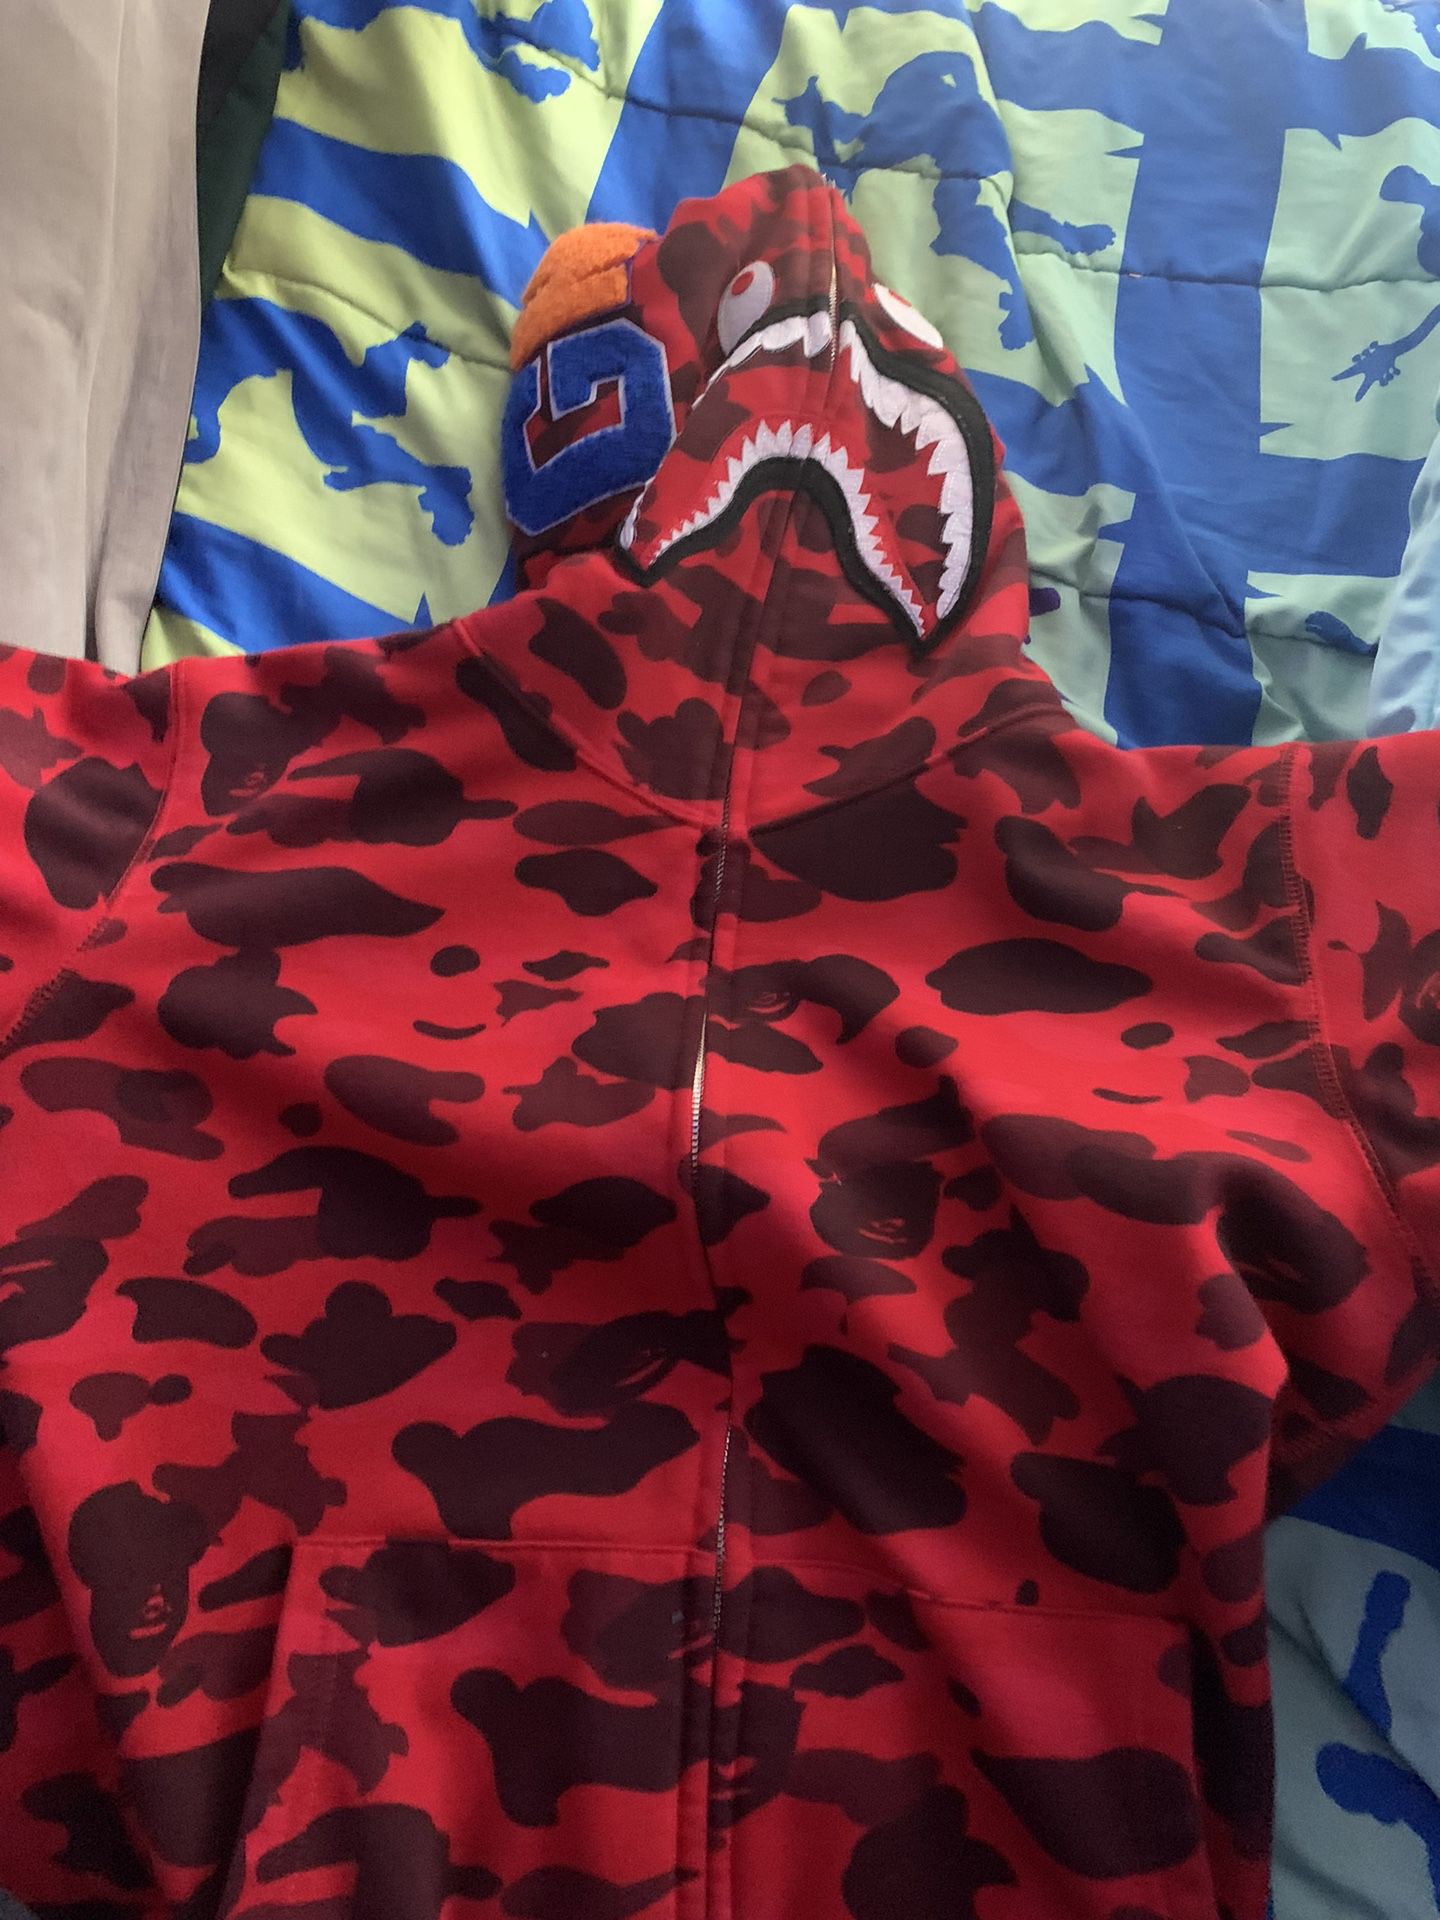 Bape hoodie Large will trade too (serious buyers)